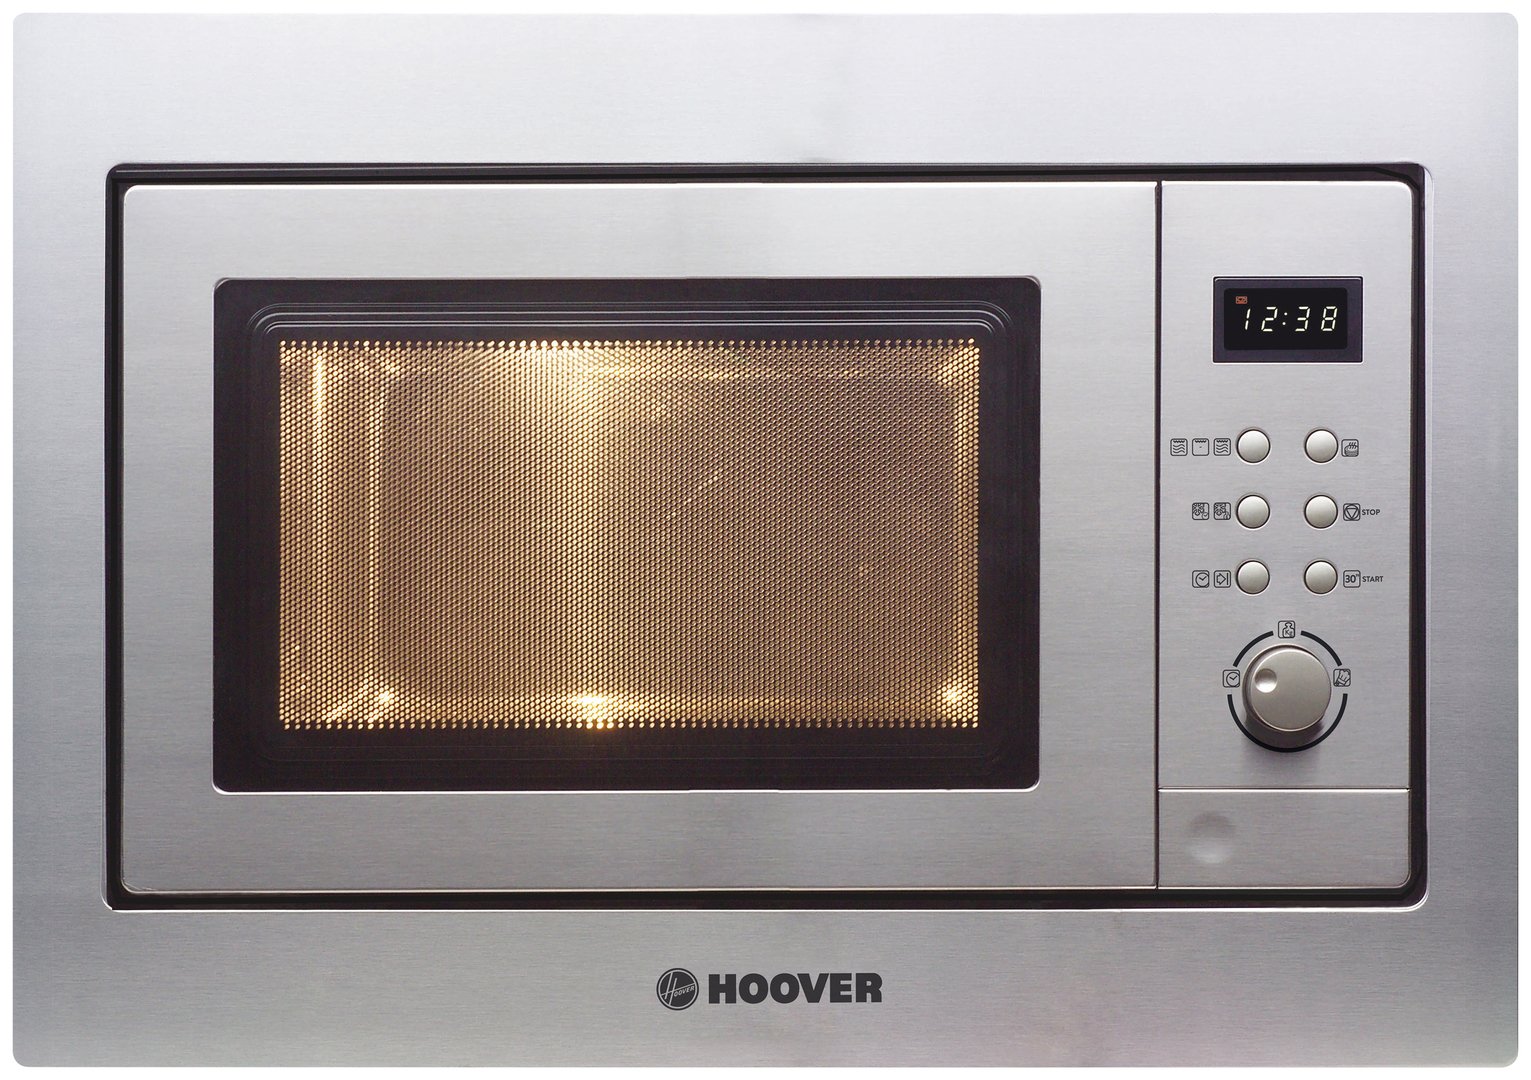 Hoover HMG201X 700W Built-in Microwave - Stainless Steel